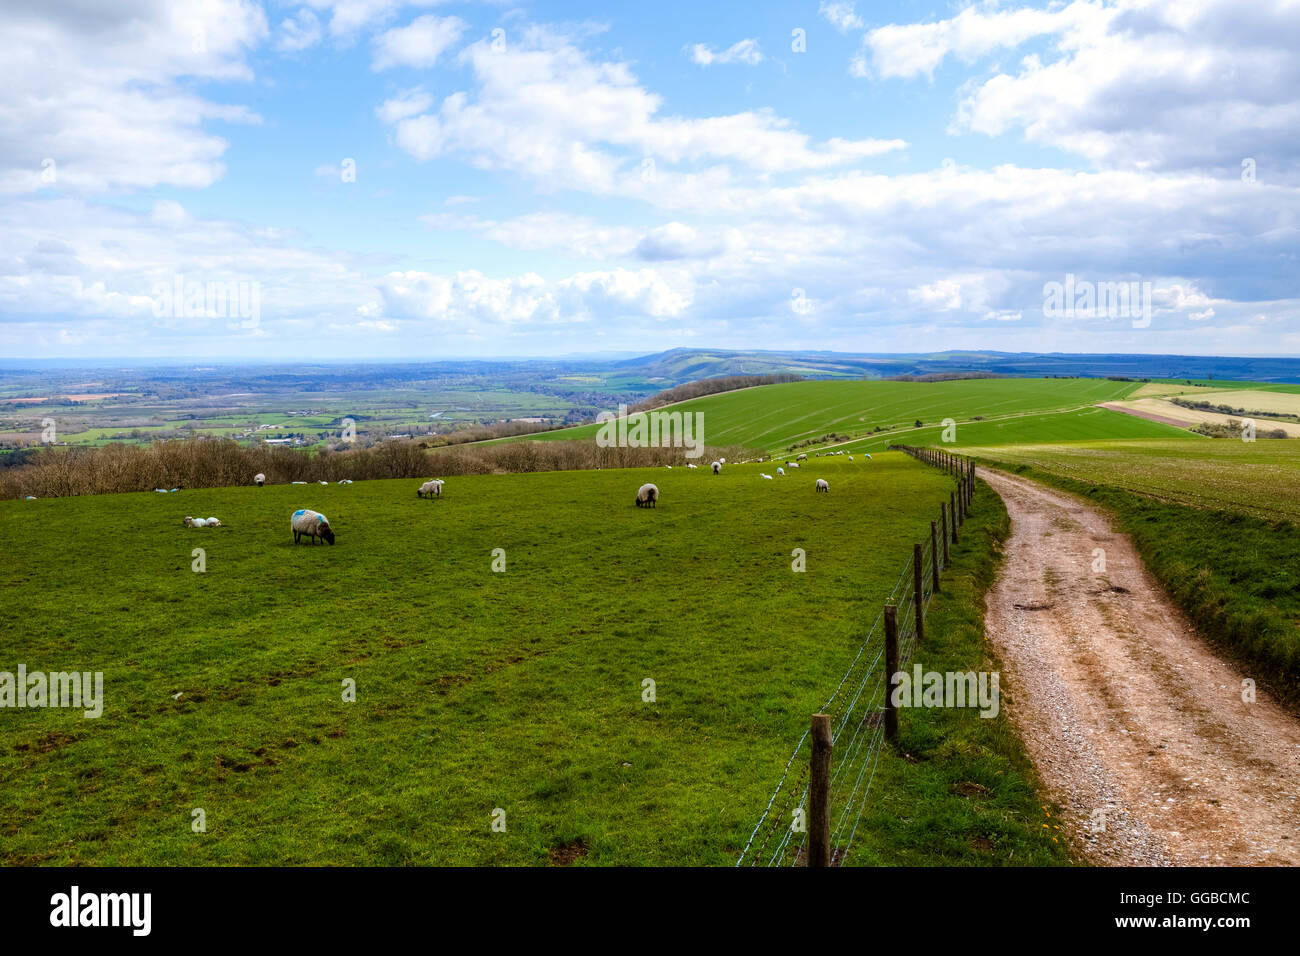 South Downs, Petworth, Chichester, West Sussex, England, UK Stockfoto